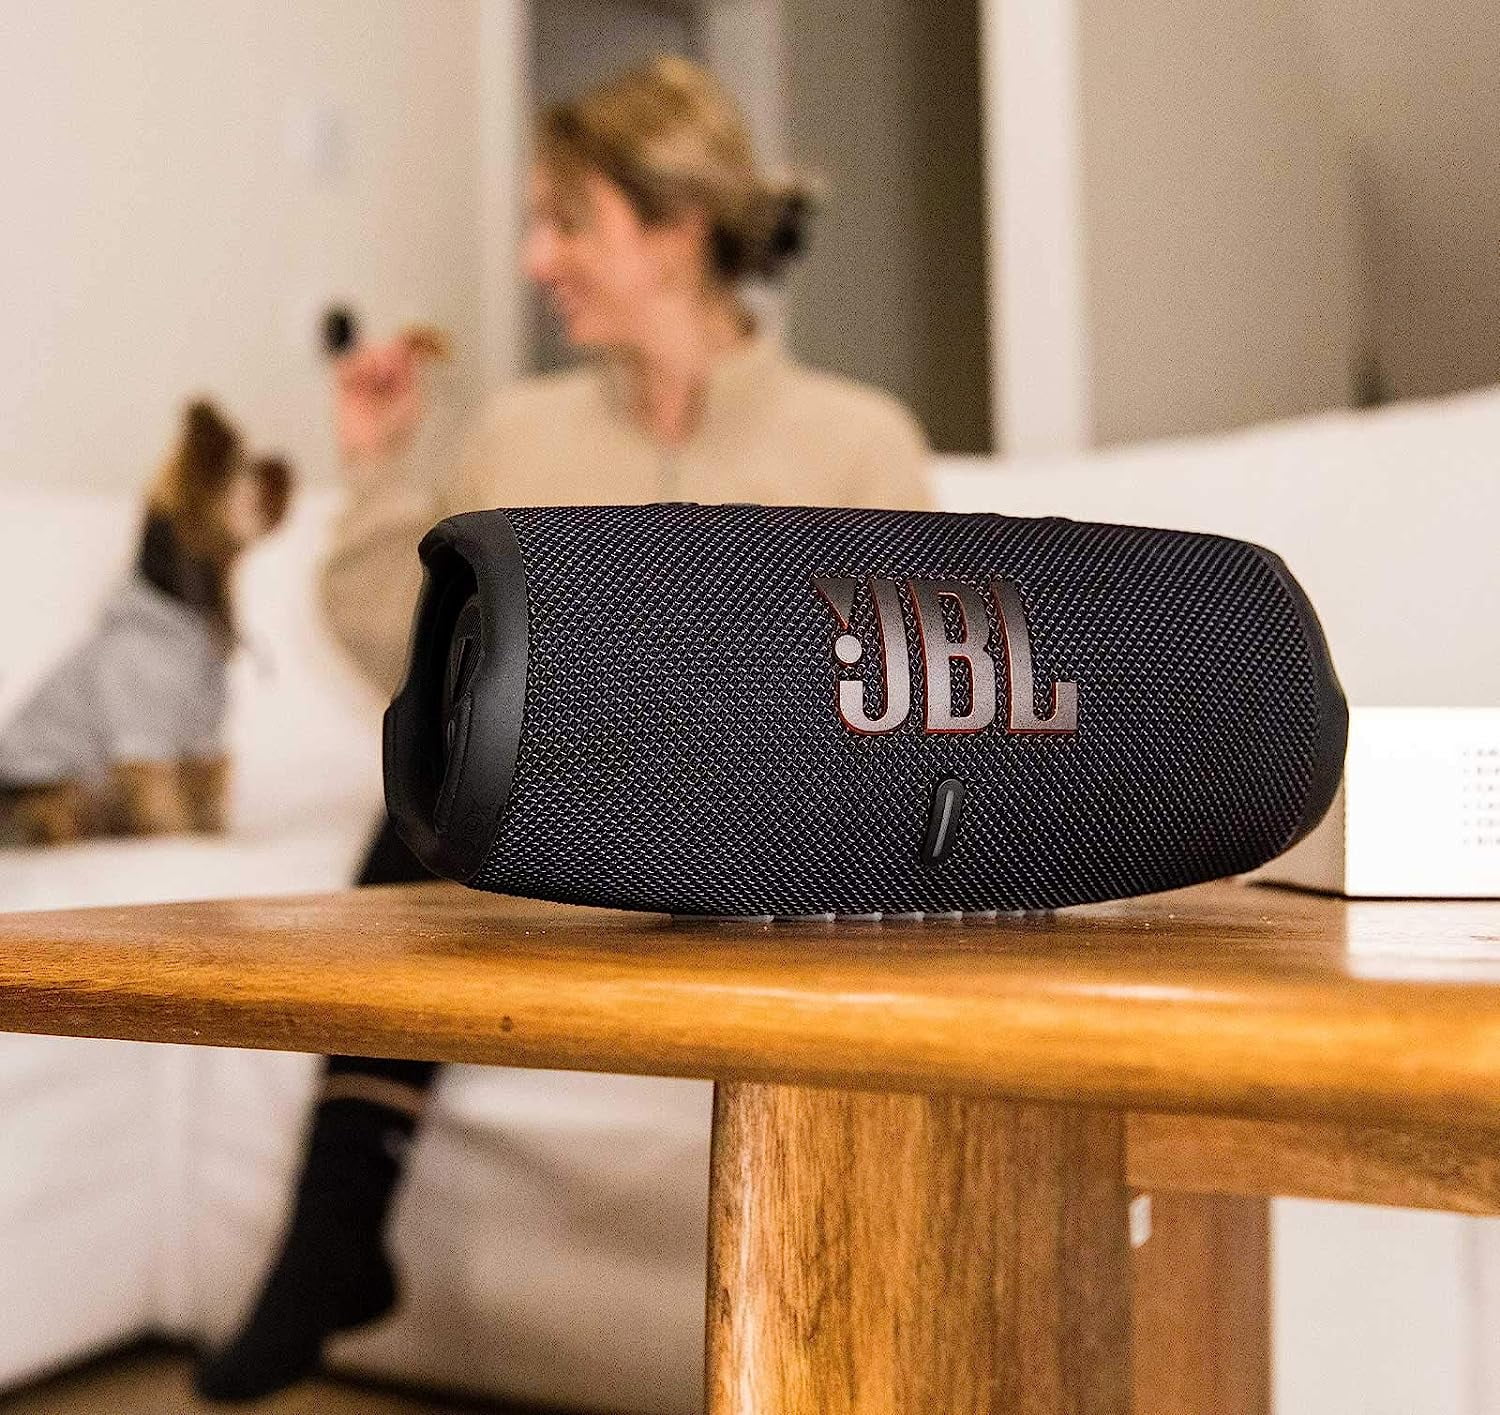 JBL's Charge 5 speaker drops to a record low in an early Black